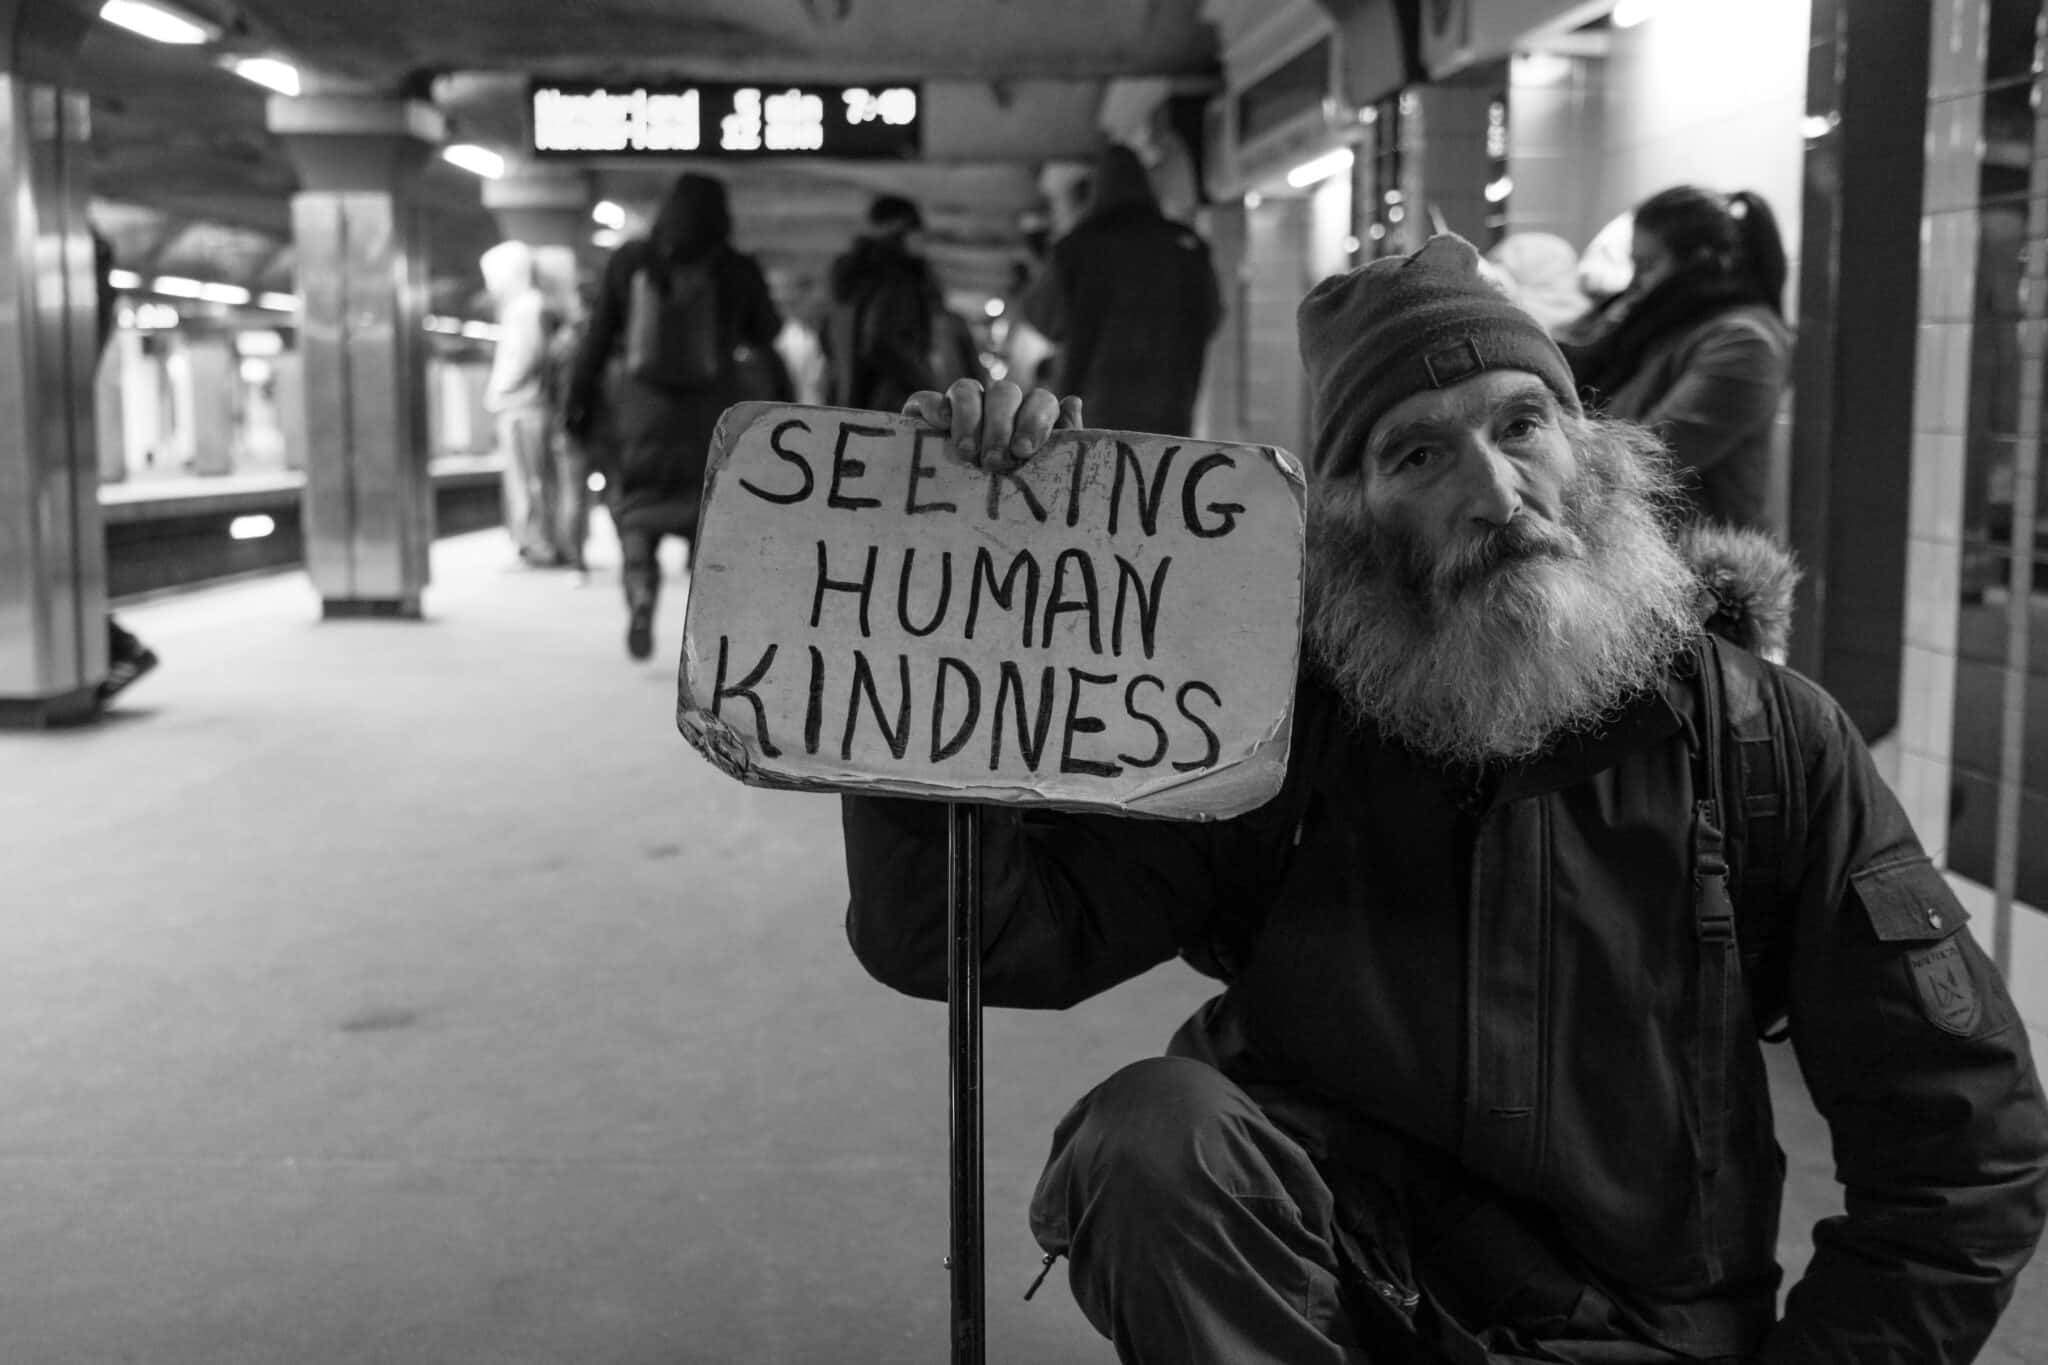 Person holding a sign that says "Seering Human Kindness"